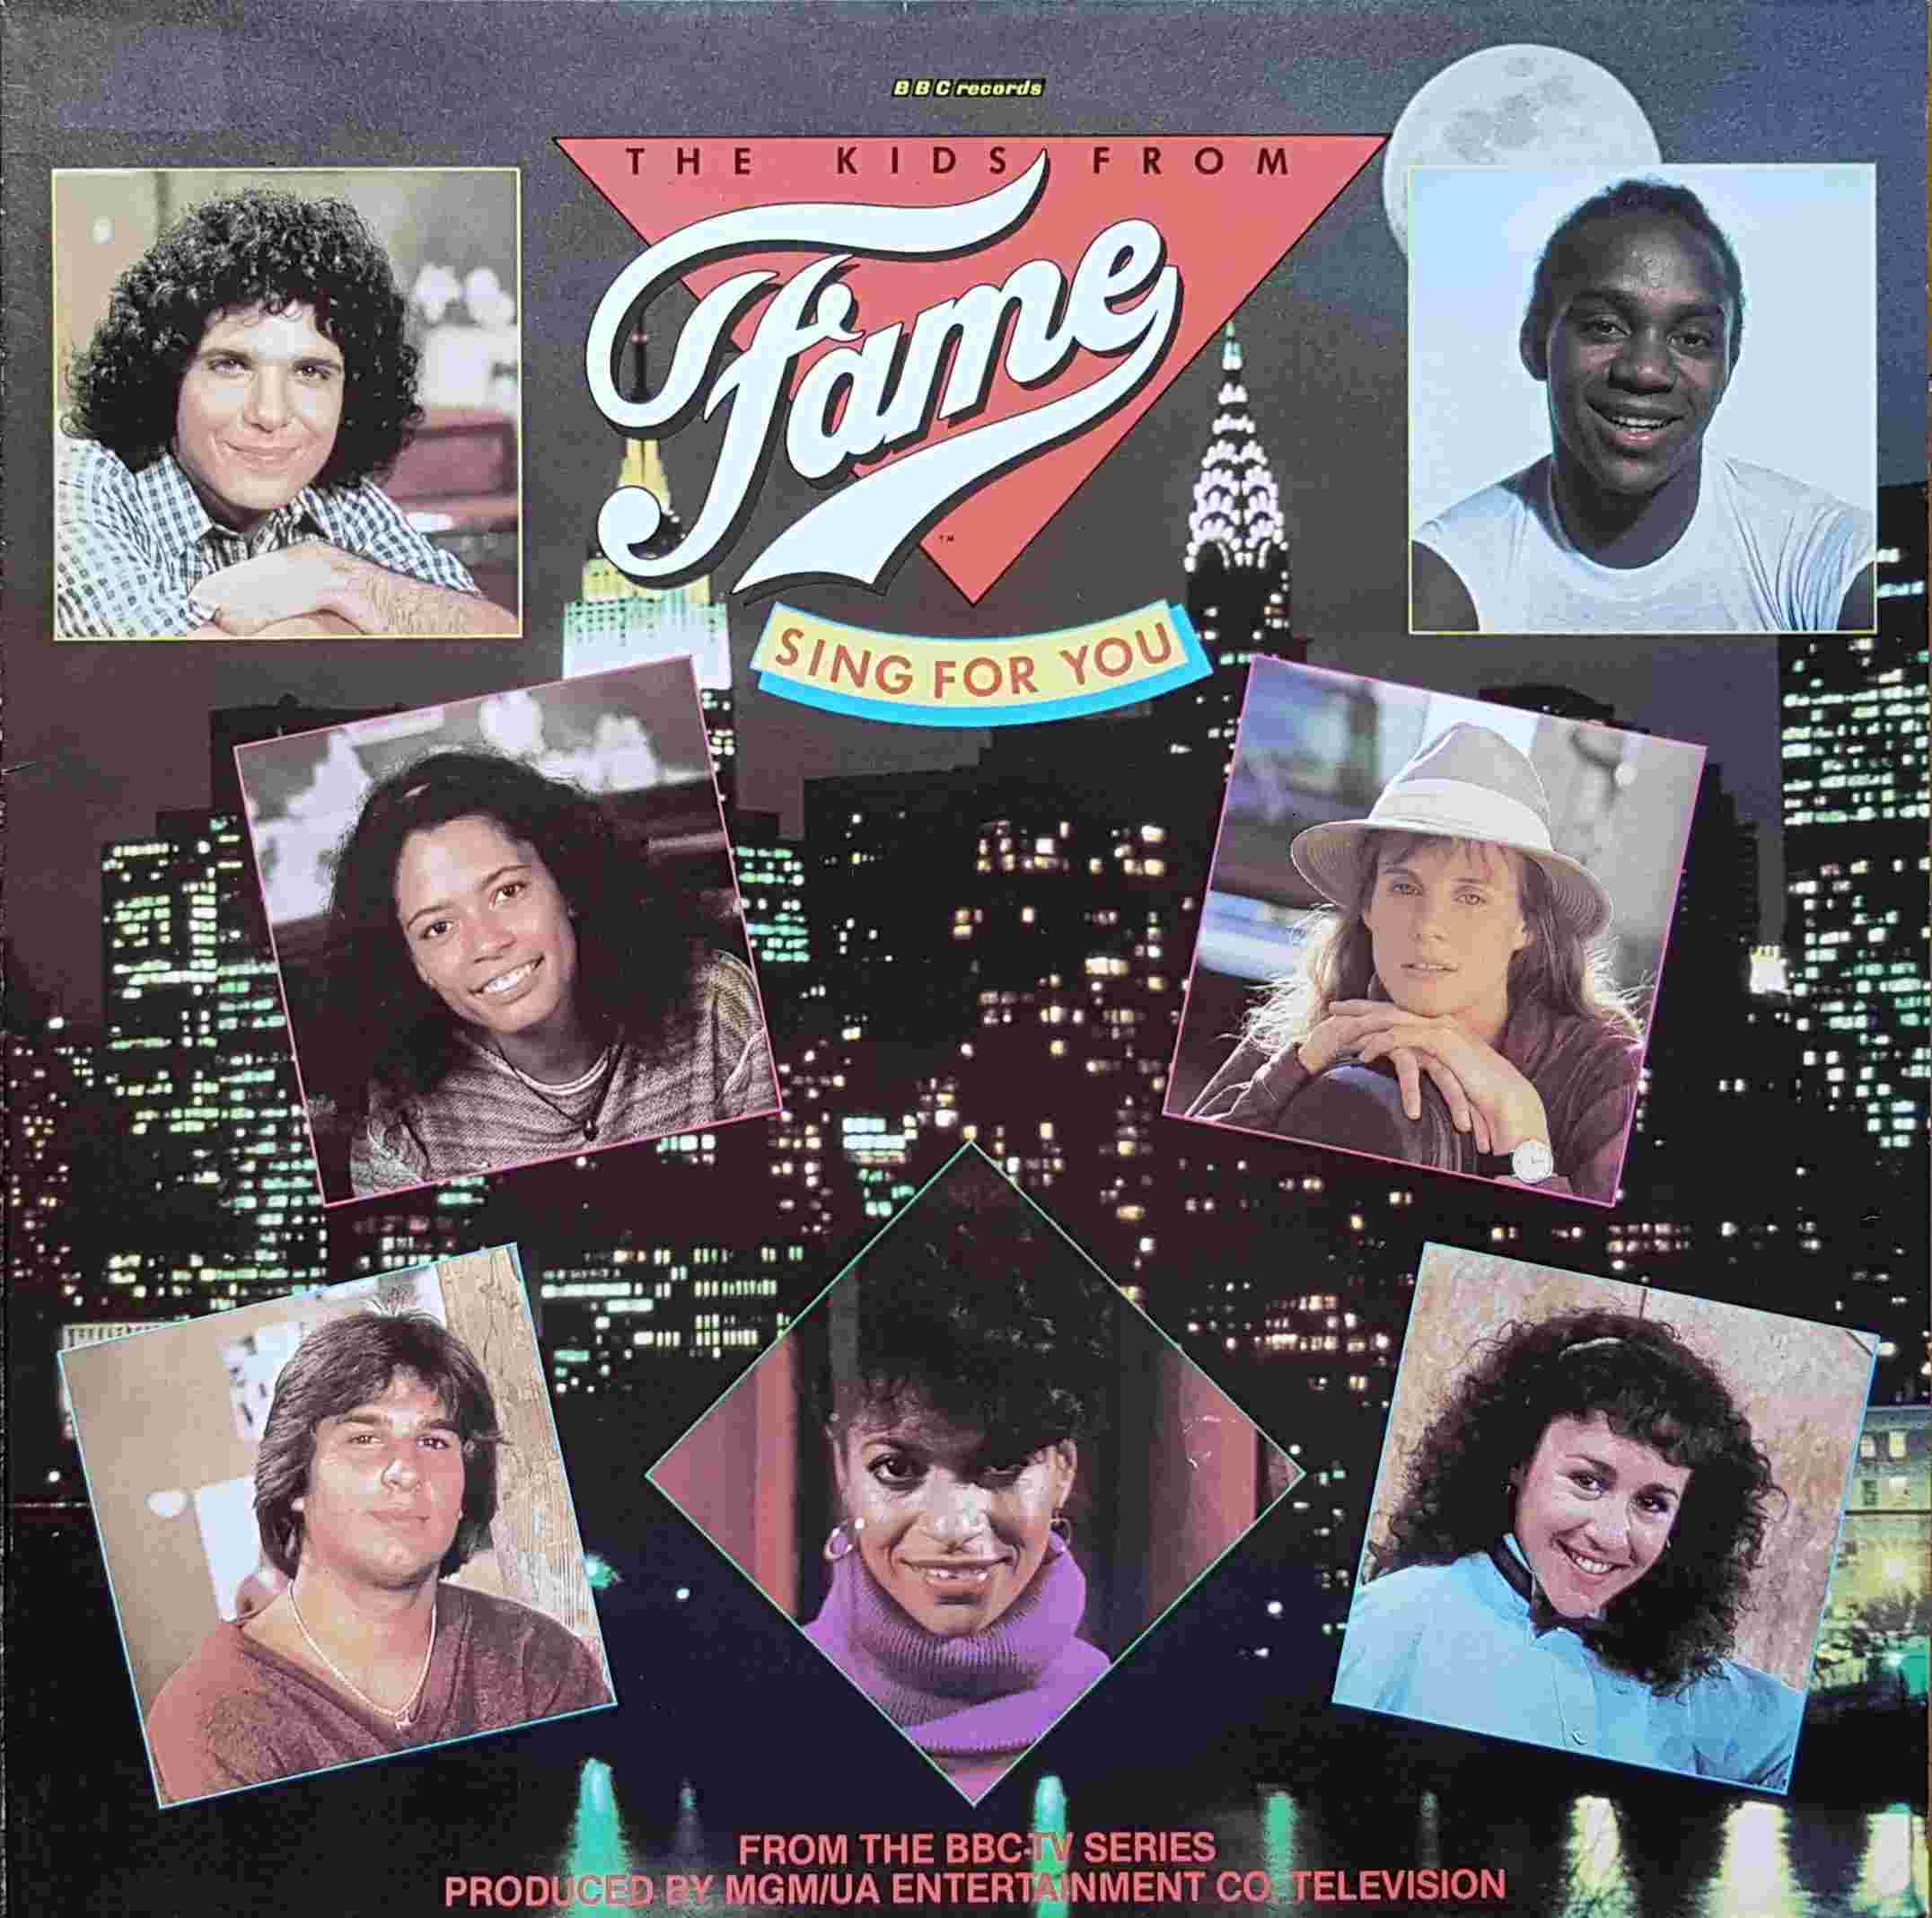 Picture of KIDLP 005 The kids from fame - Volume 5 by artist Various from the BBC albums - Records and Tapes library